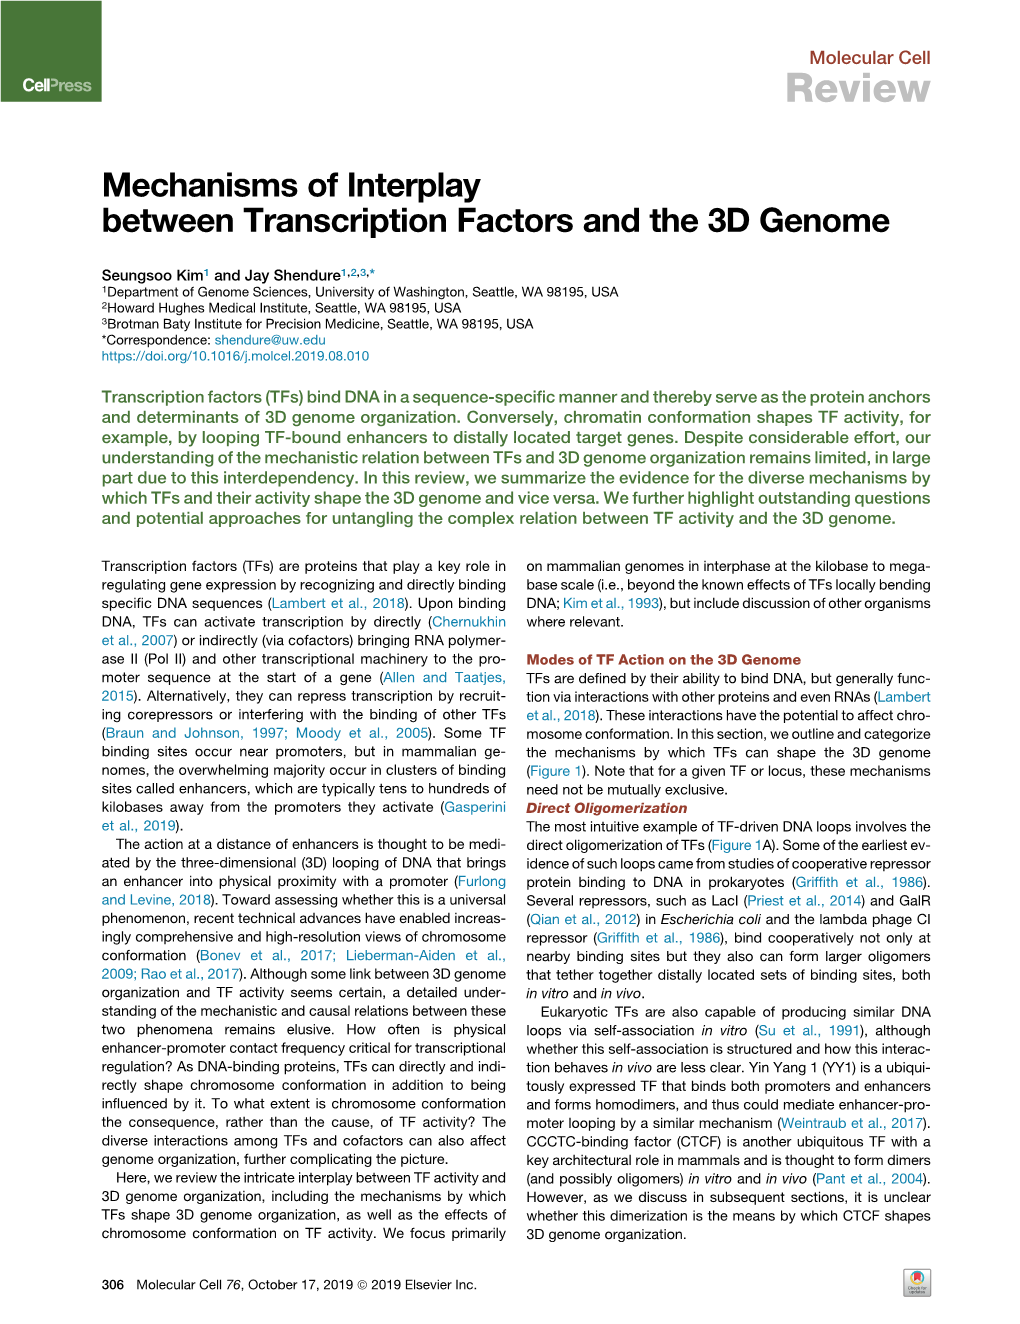 Mechanisms of Interplay Between Transcription Factors and the 3D Genome